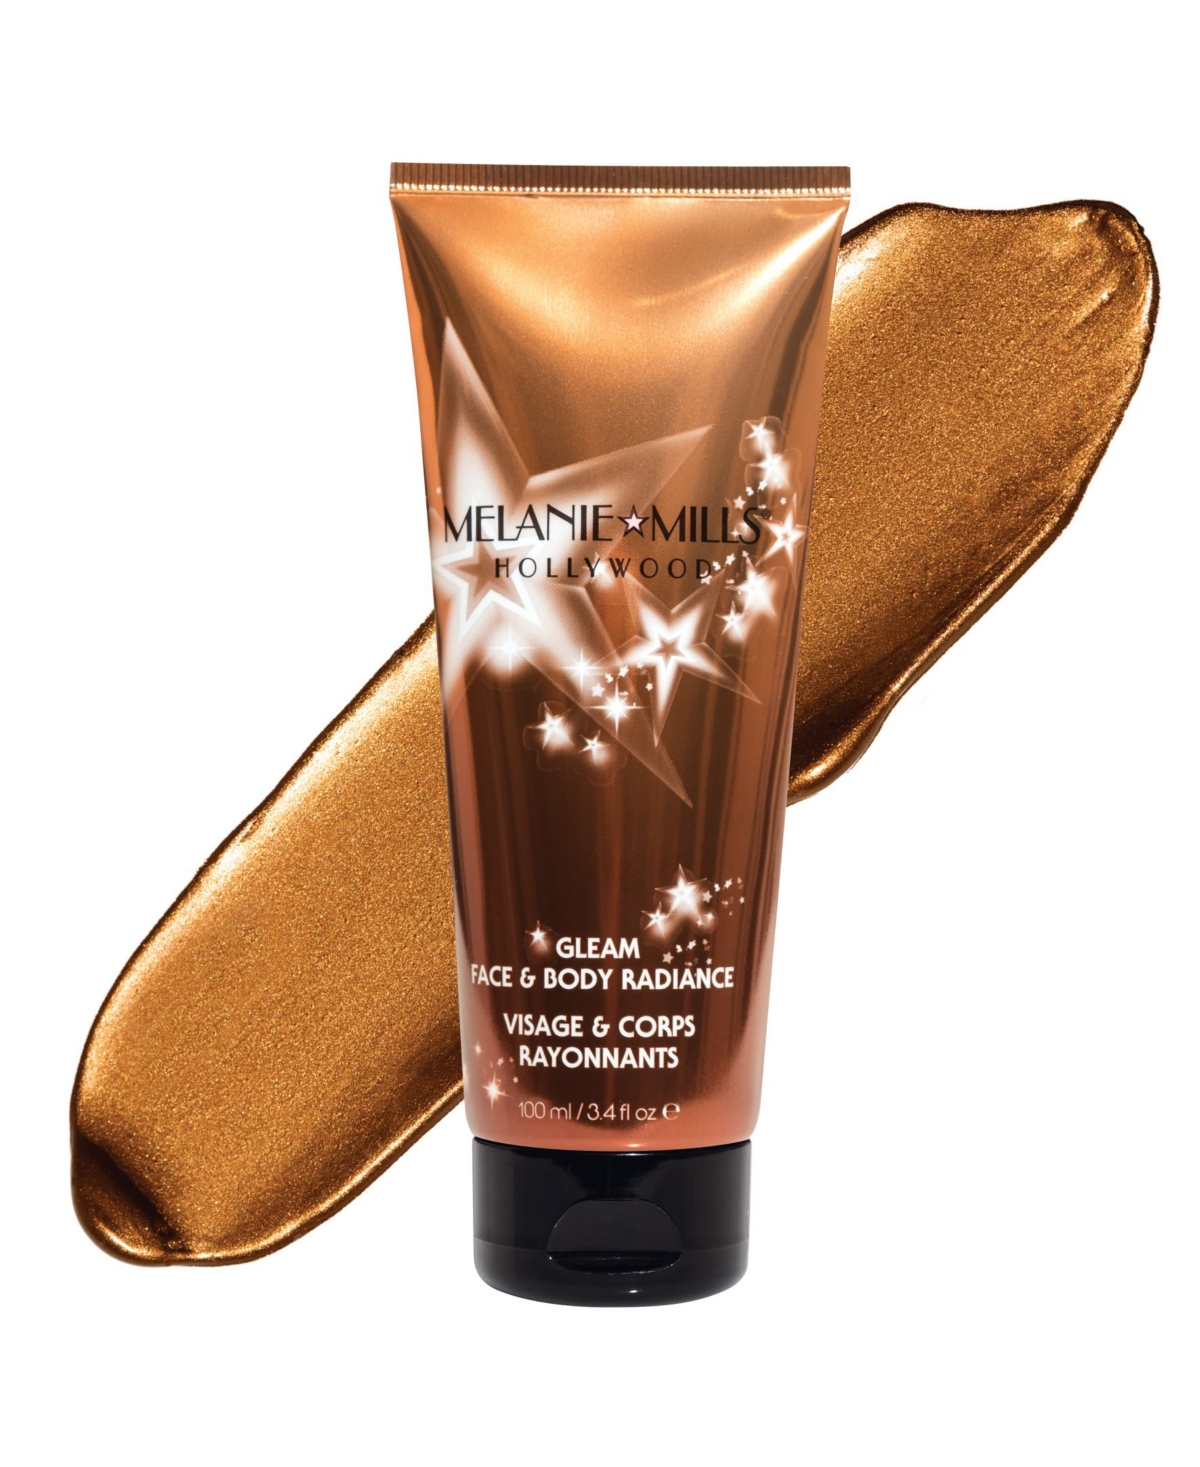 Gleam Face and Body Radiance All in One Makeup, Moisturizer and Glow, 3.4 oz - Peach Deluxe